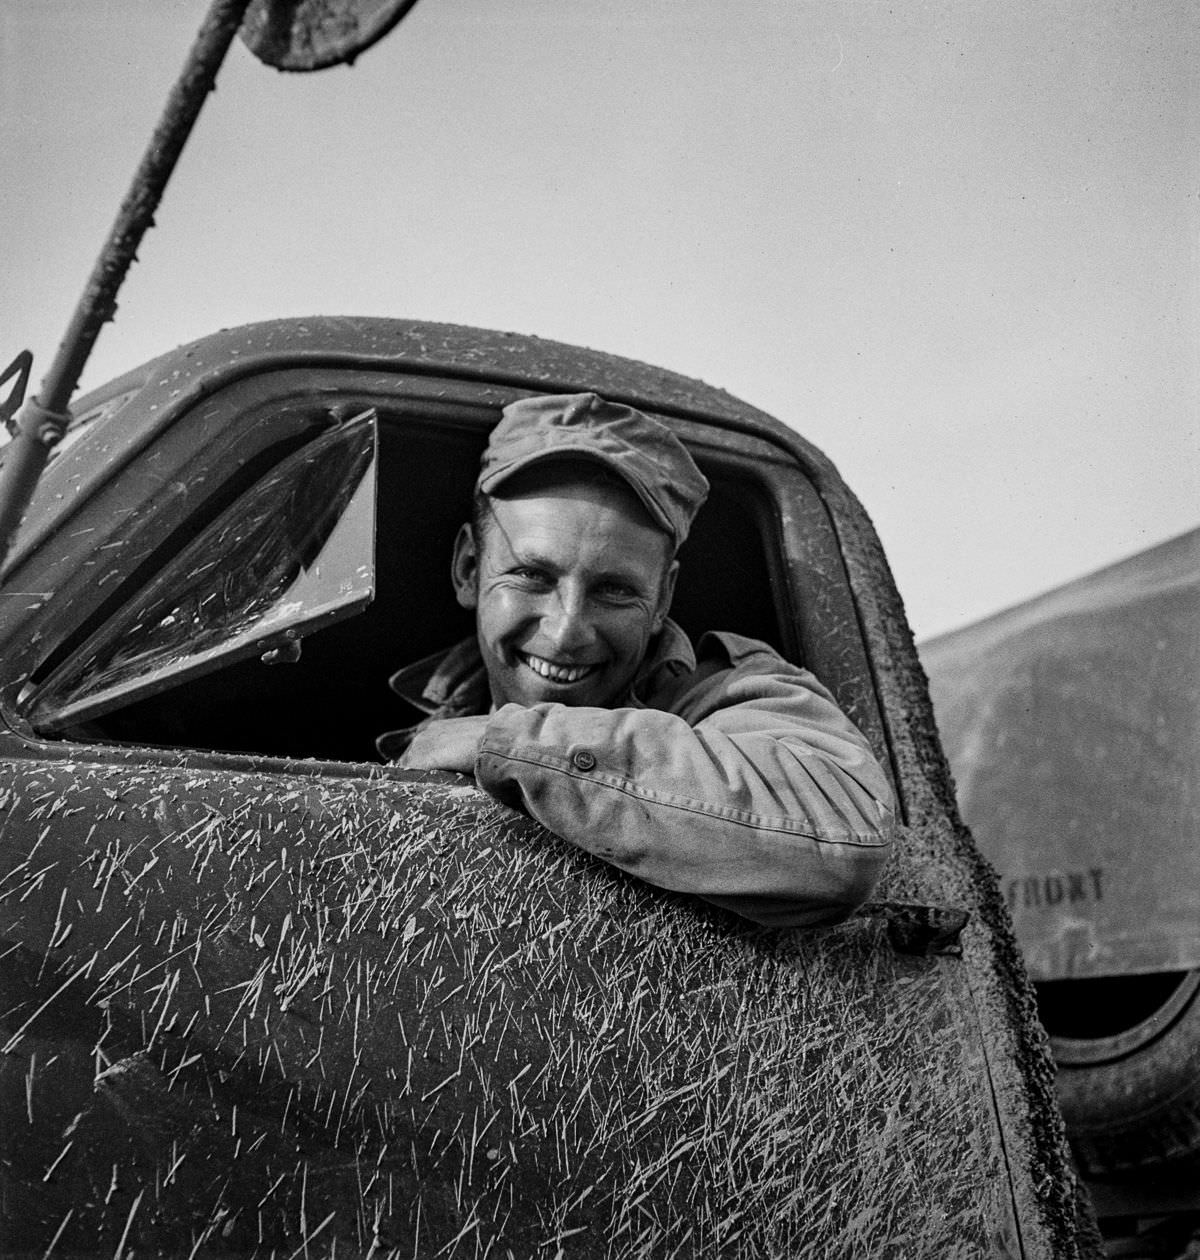 Private Zeno W. Muhl of Baltimore, Maryland. He owns his own dump truck in civilian life.